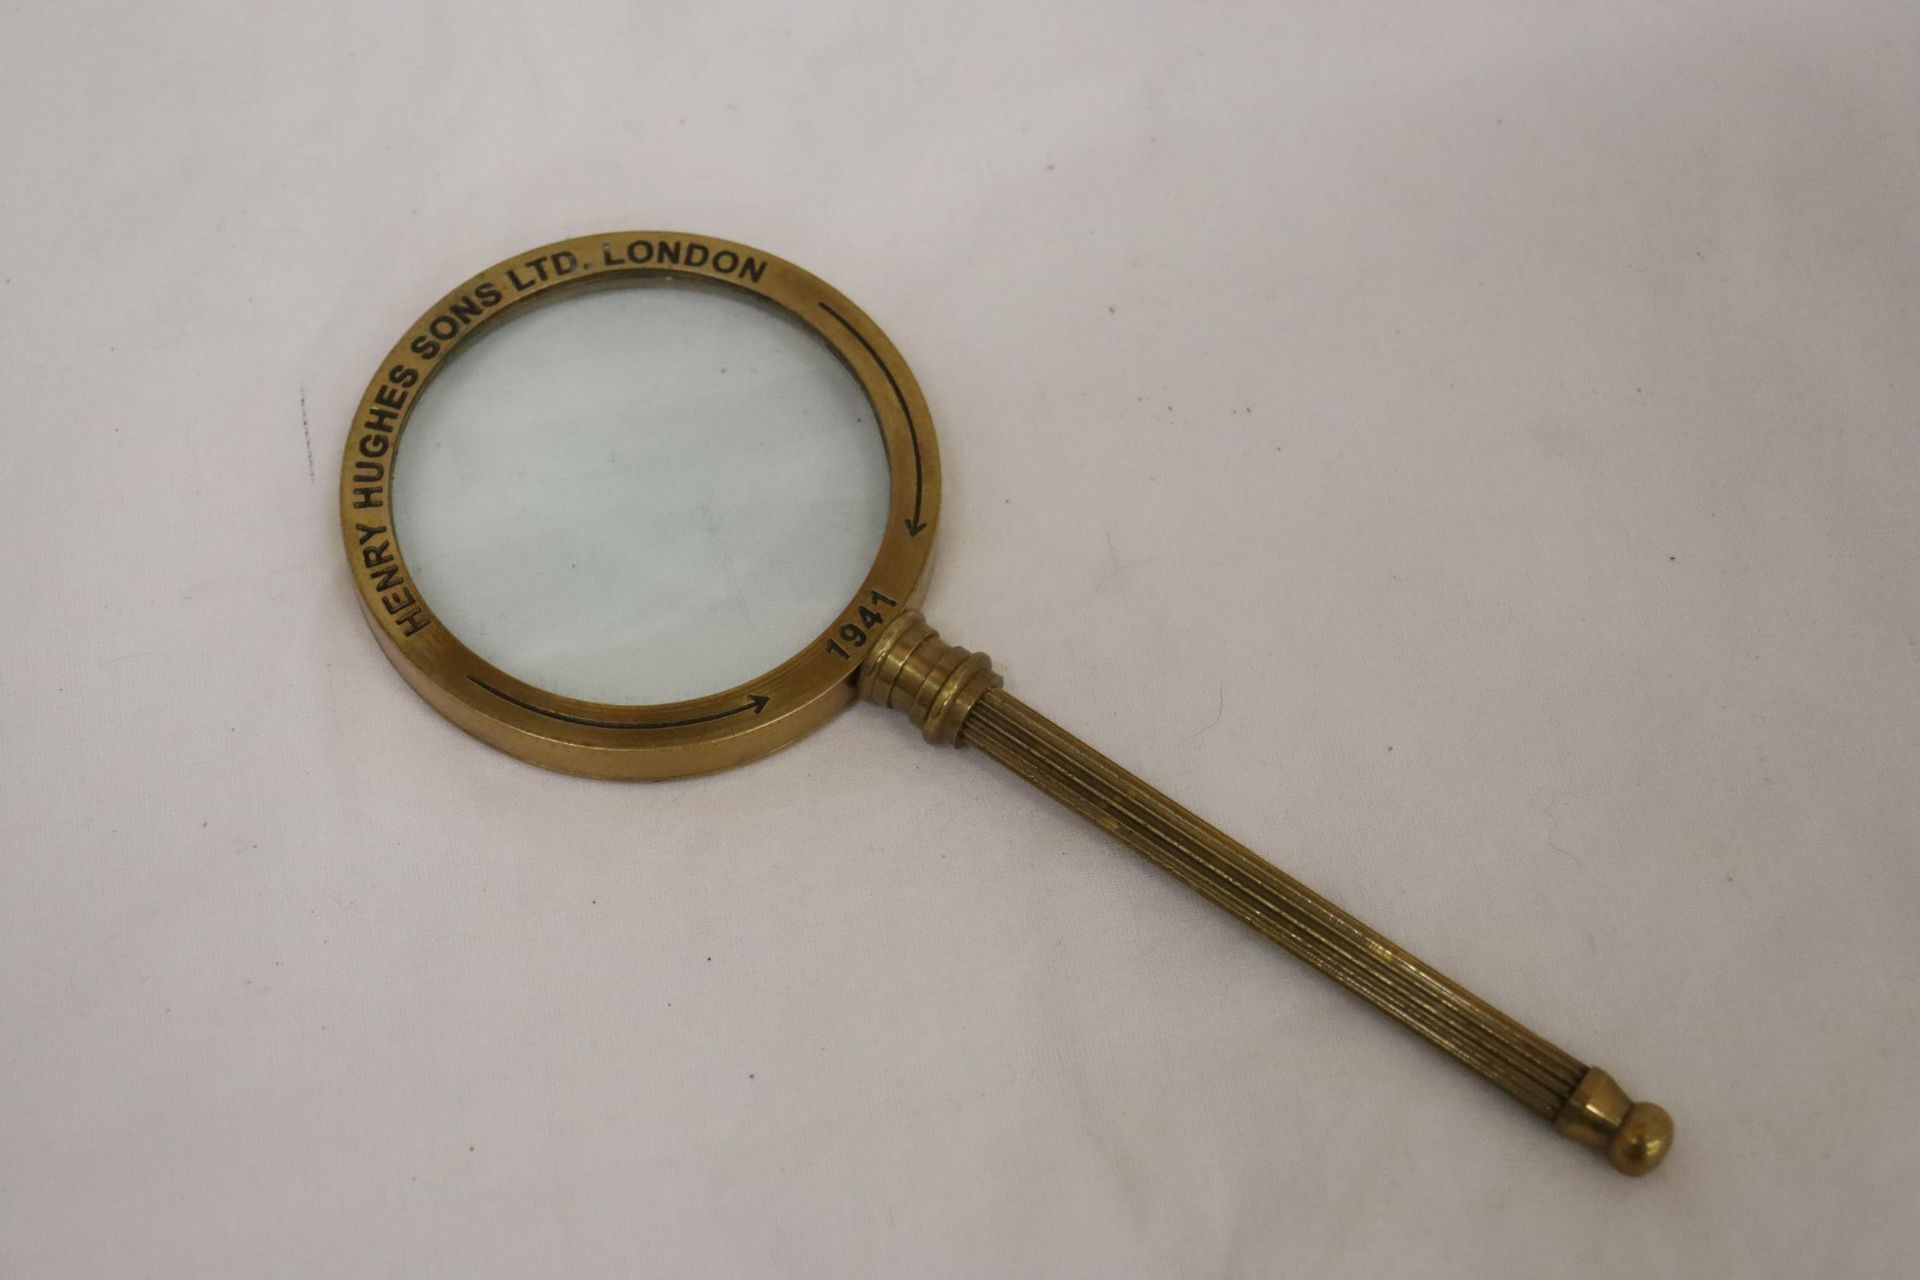 A HANDMADE VINTAGE ANTIQUE HENRY HUGHES & SONS OF LONDON 1941 BRASS MAGNIFYING GLASS